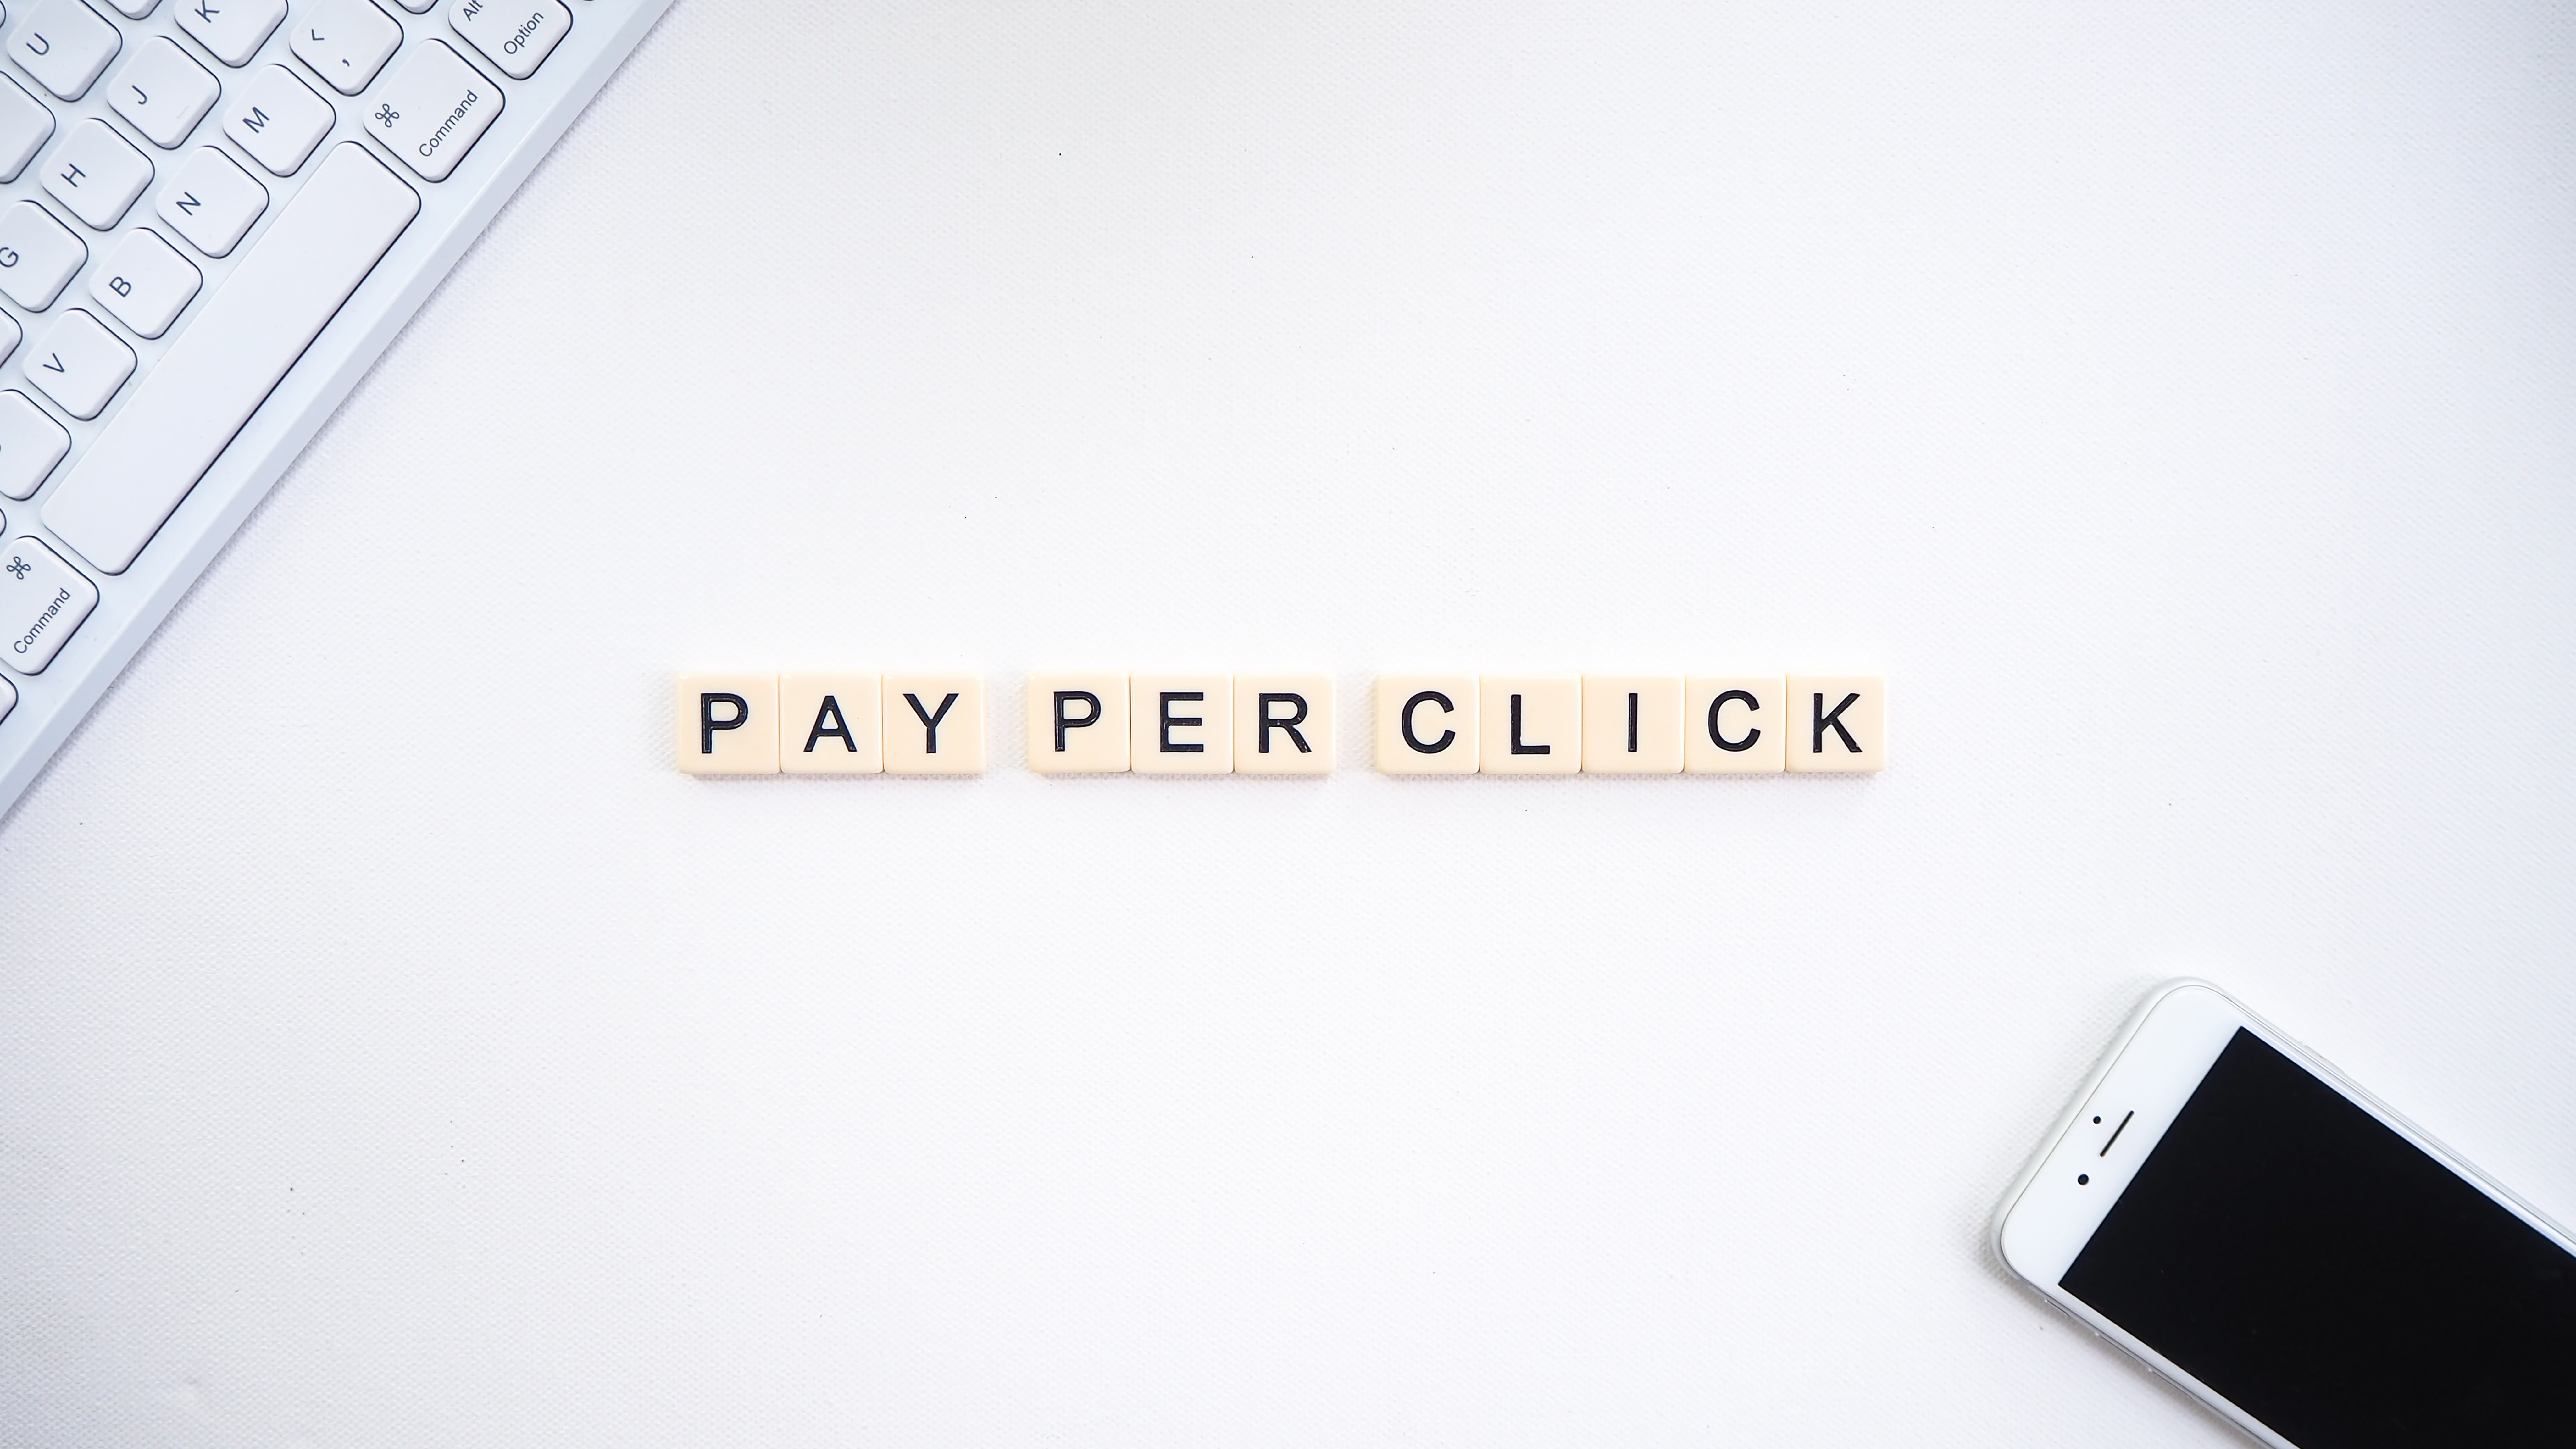 Image of Pay Per Click spelled out in Scrabble letters